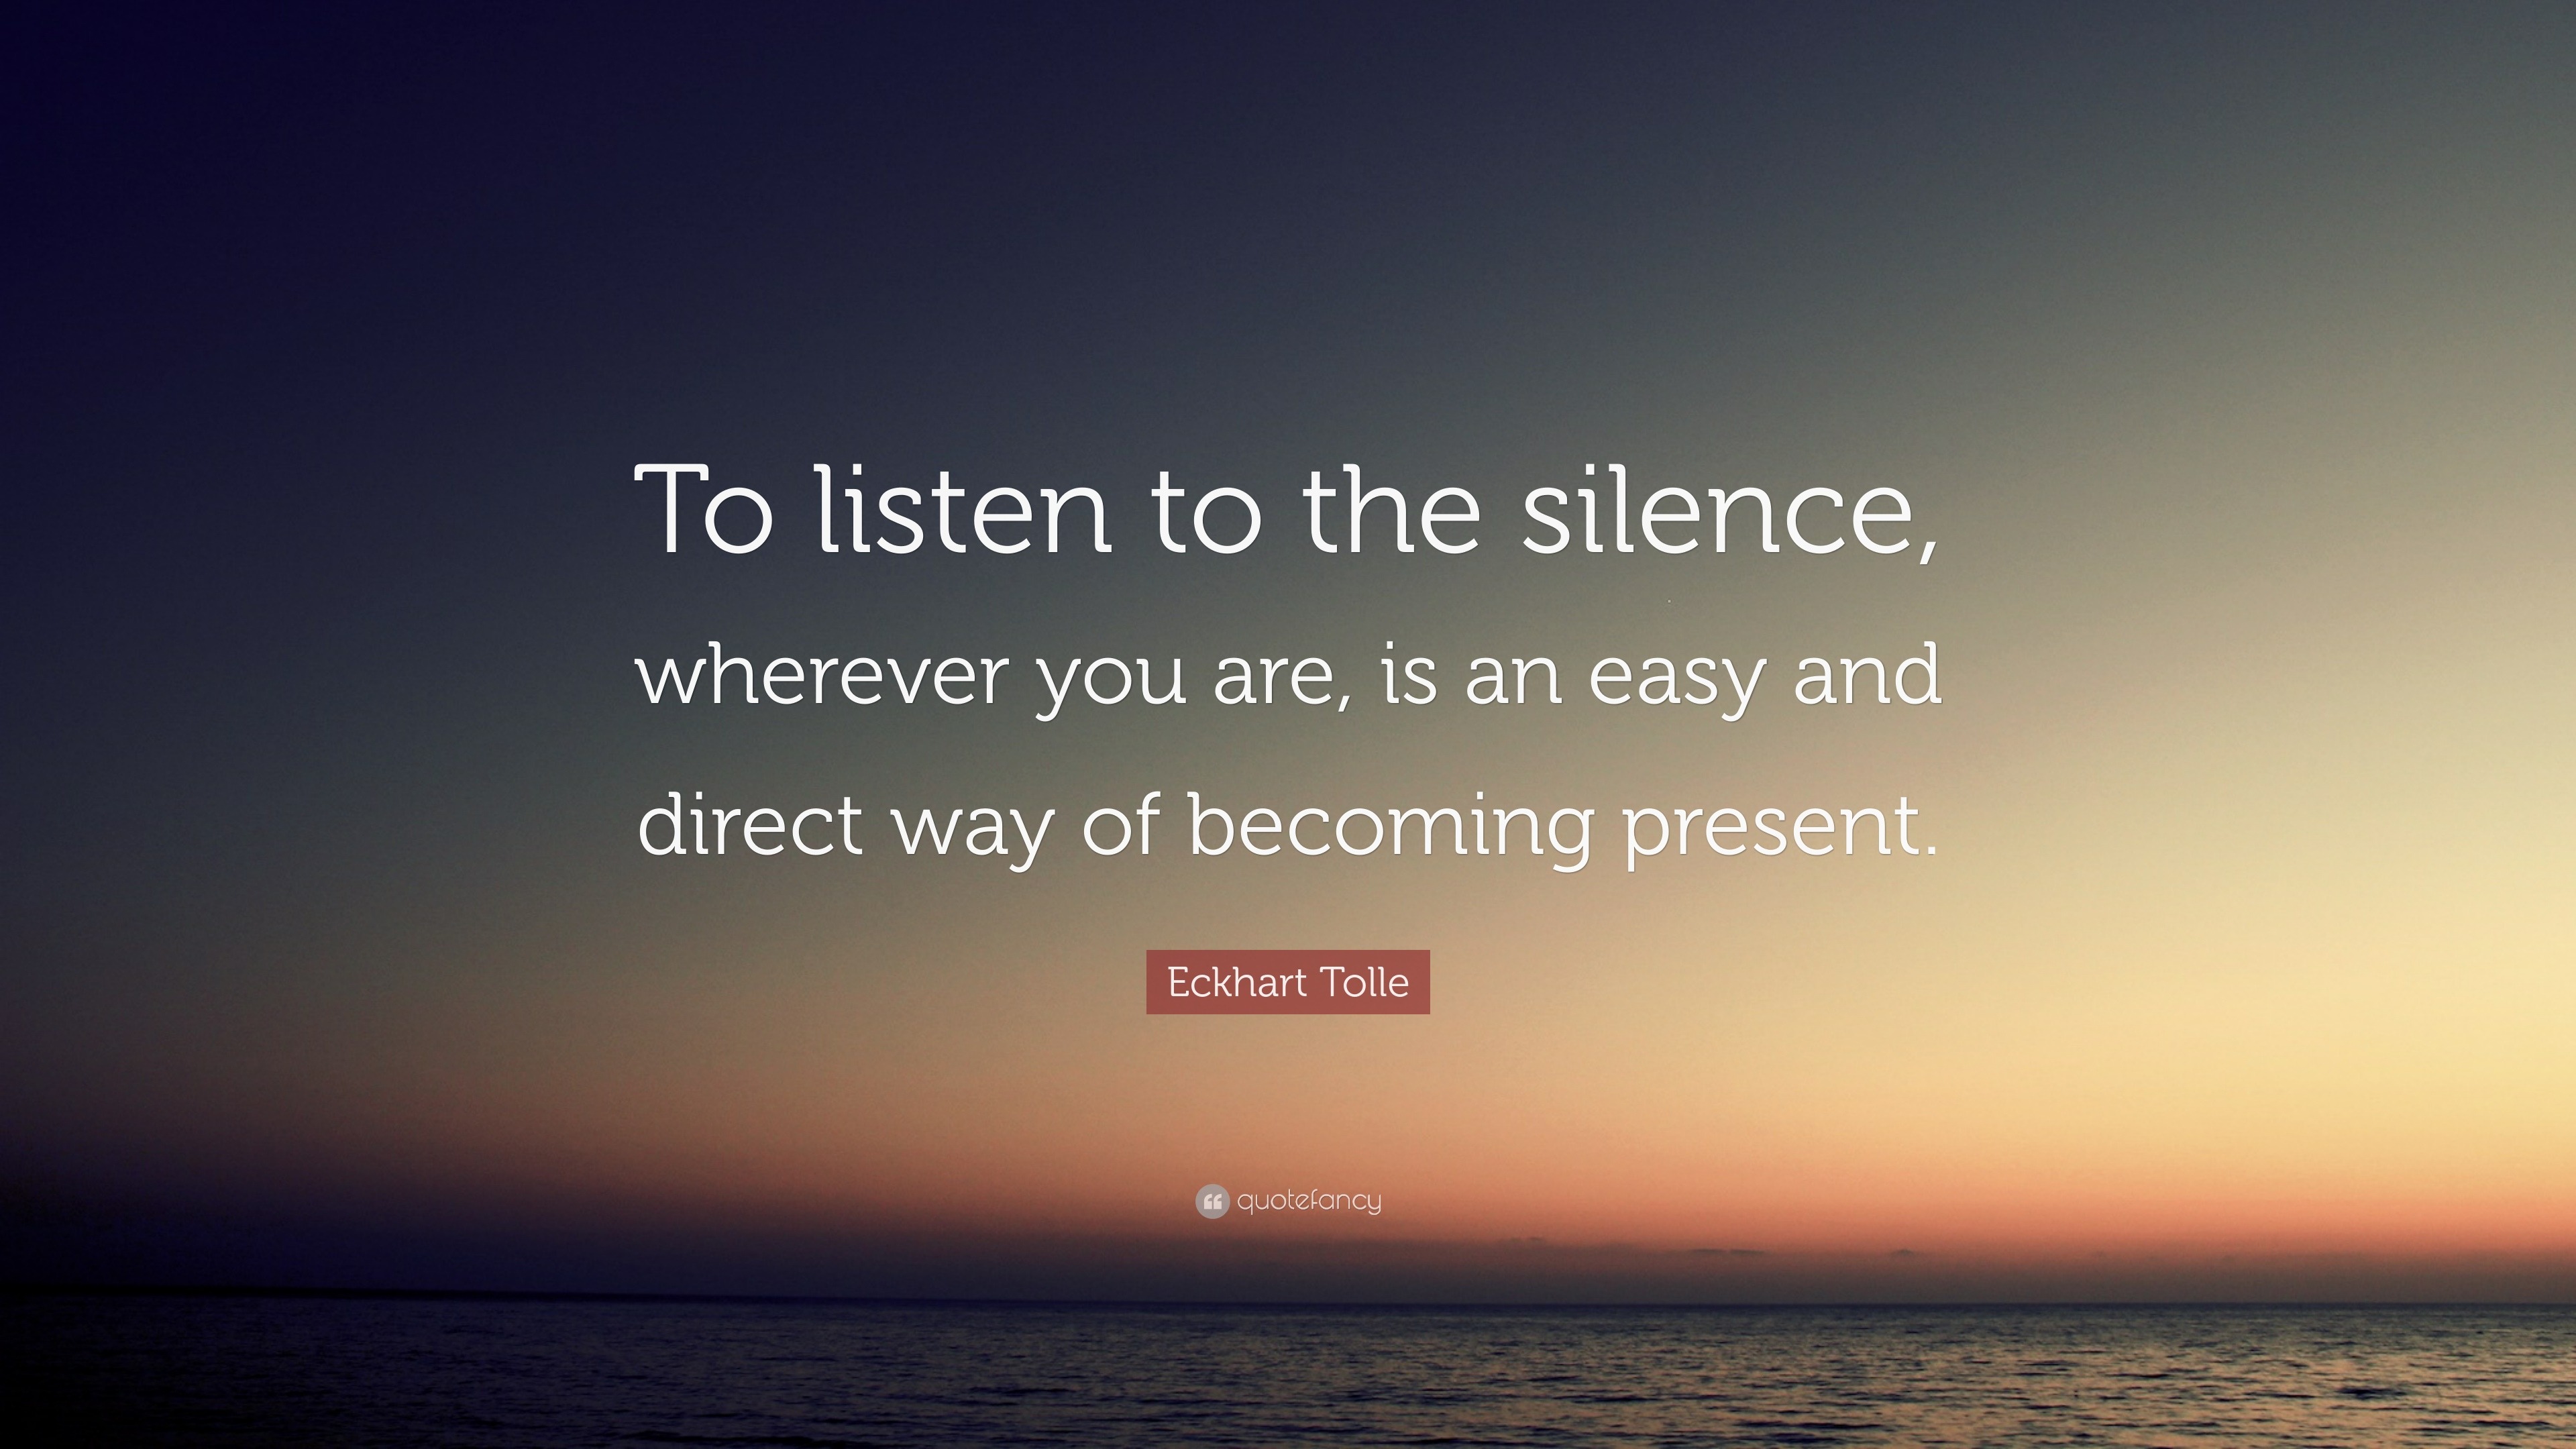 Eckhart Tolle Quote: “To listen to the silence, wherever you are, is an ...